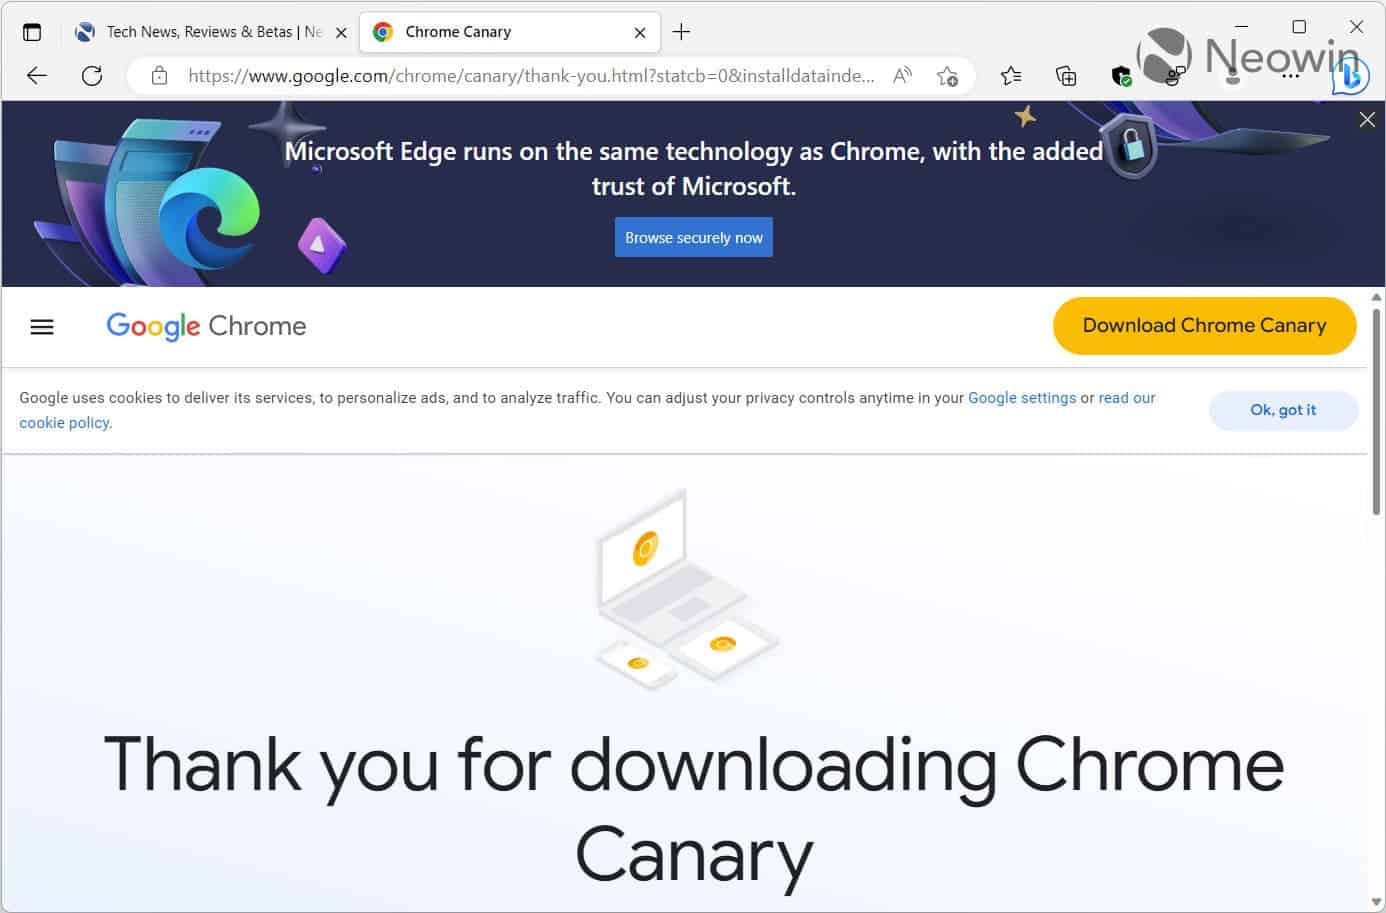 Microsoft injects ads for Edge on the Chrome download page